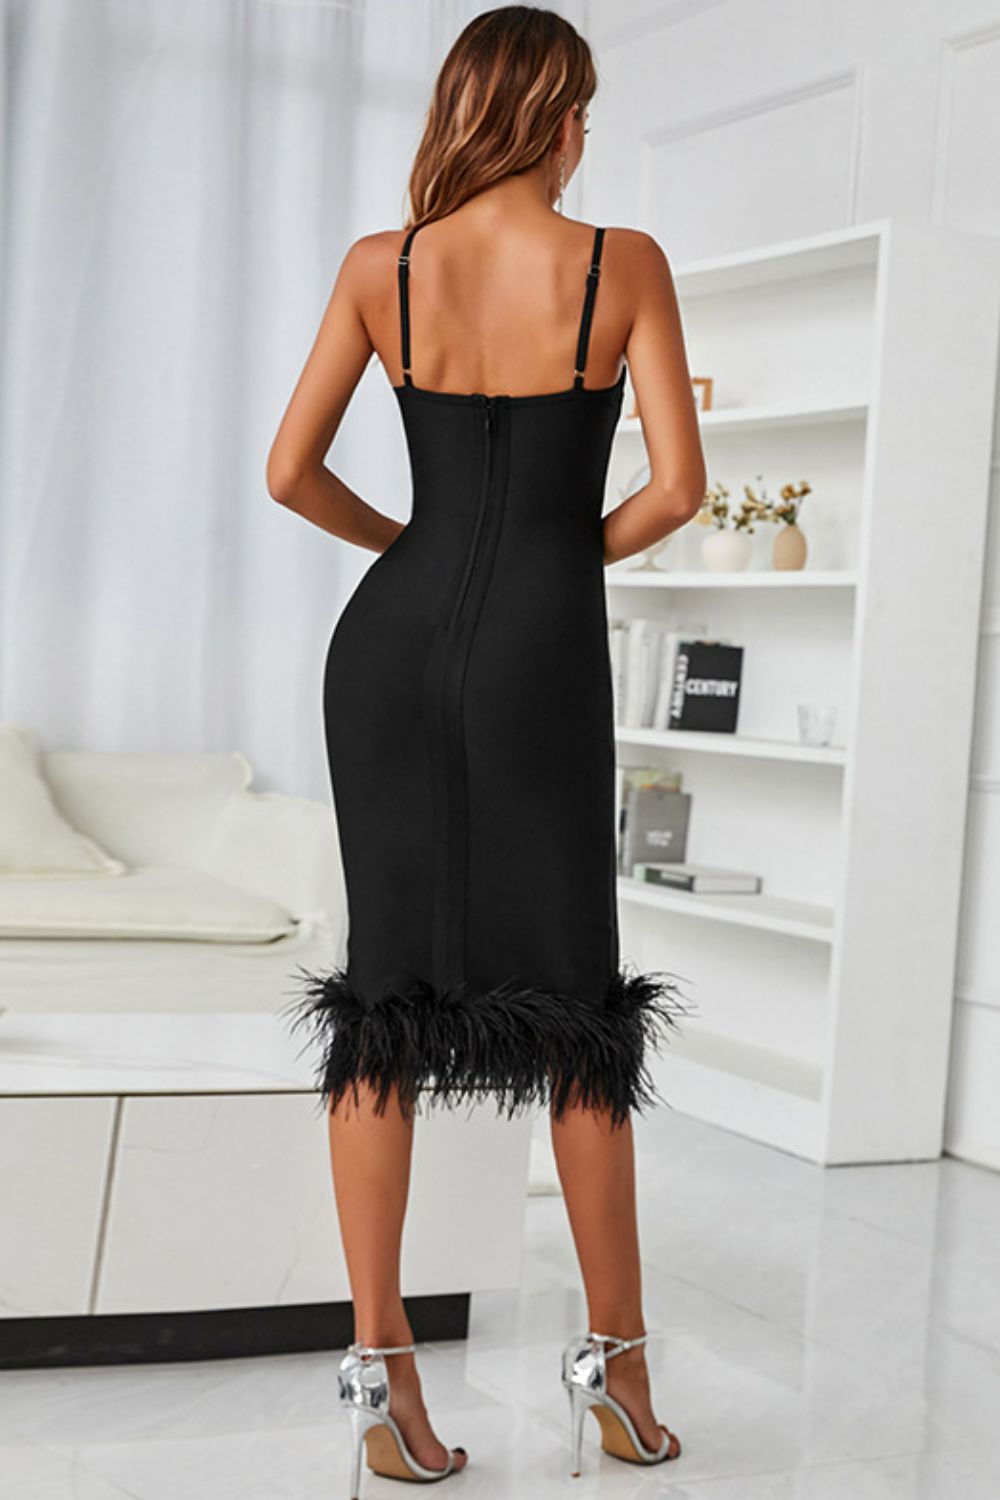 Cordelia Glamour Feather-Trimmed Bodycon Cocktail Dress in Solid Black